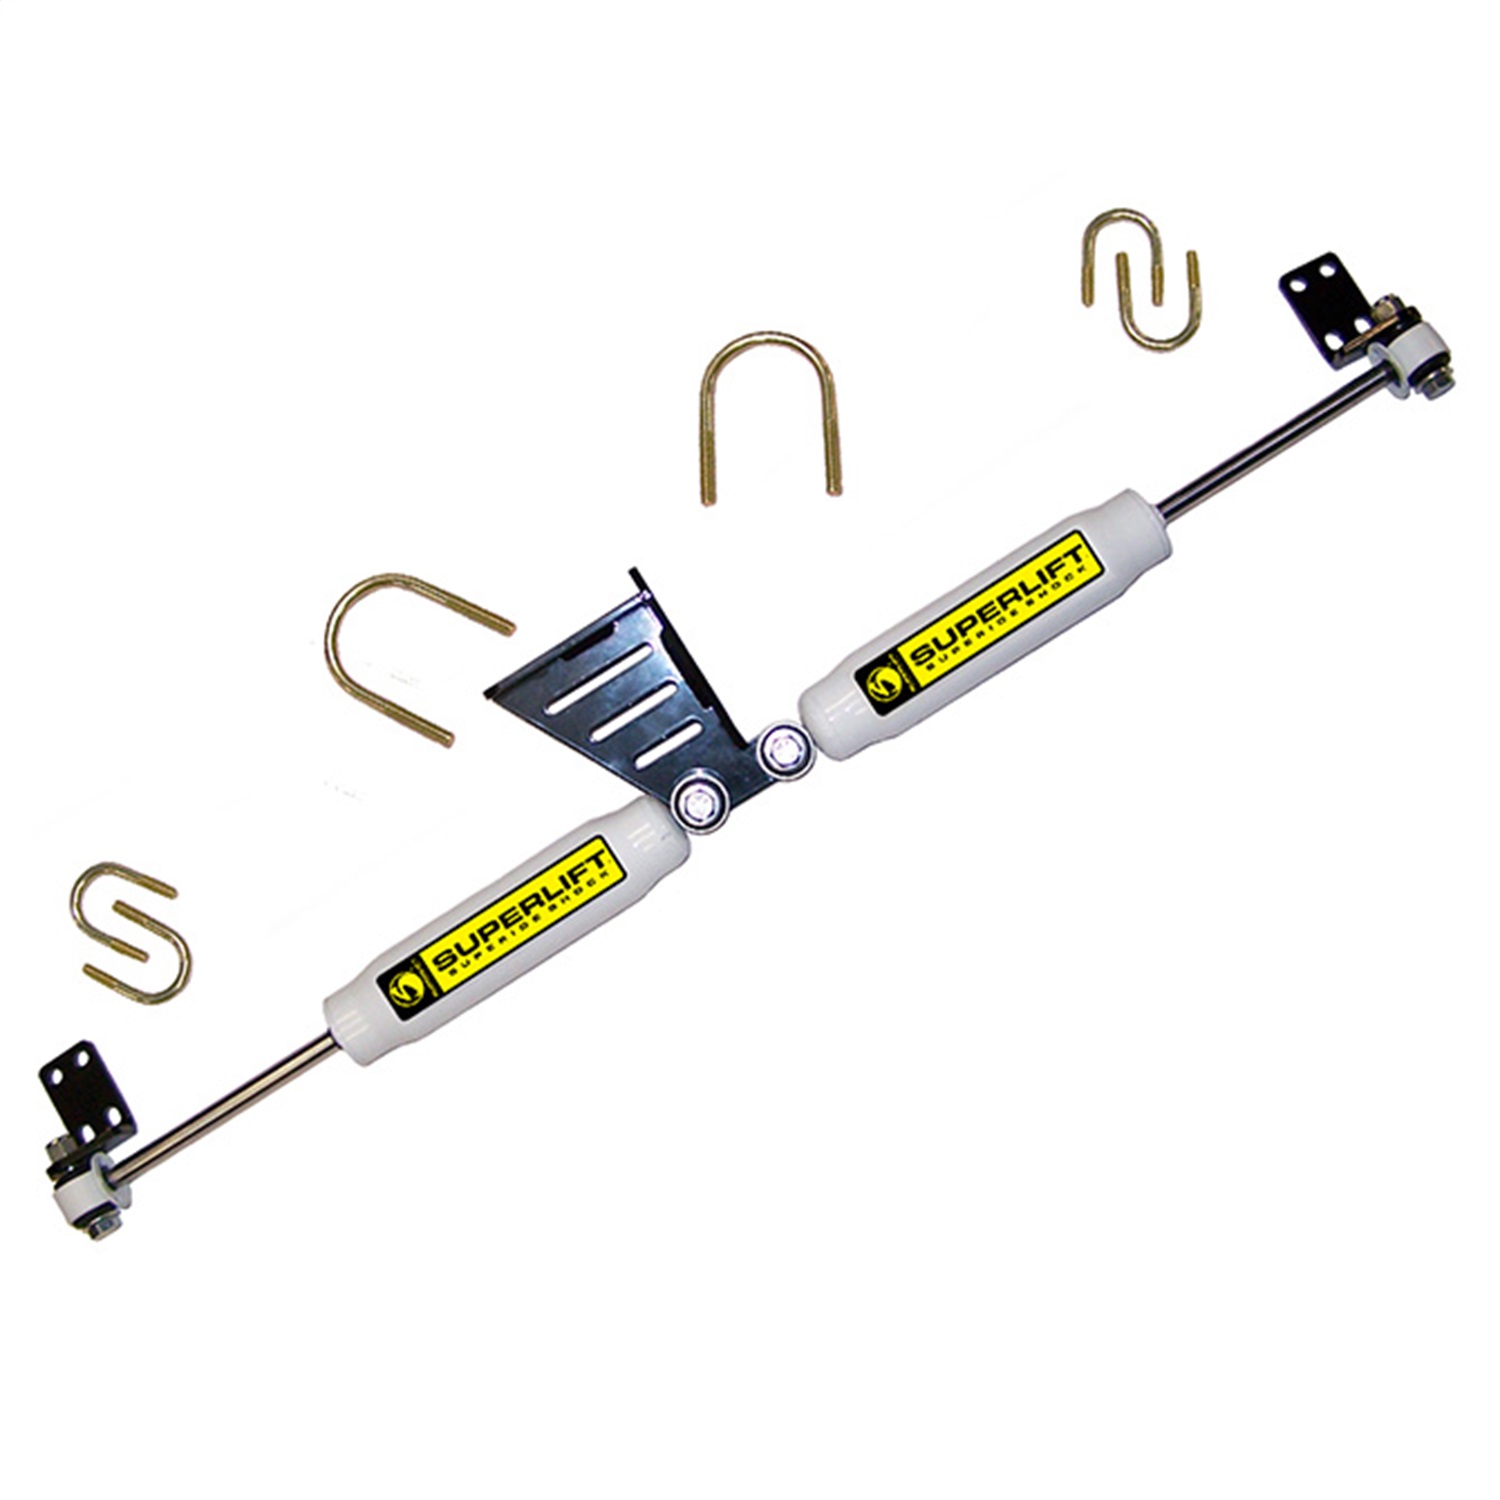 Superlift 92095 High Clearance Superide Dual Steering Stabilizer Kit